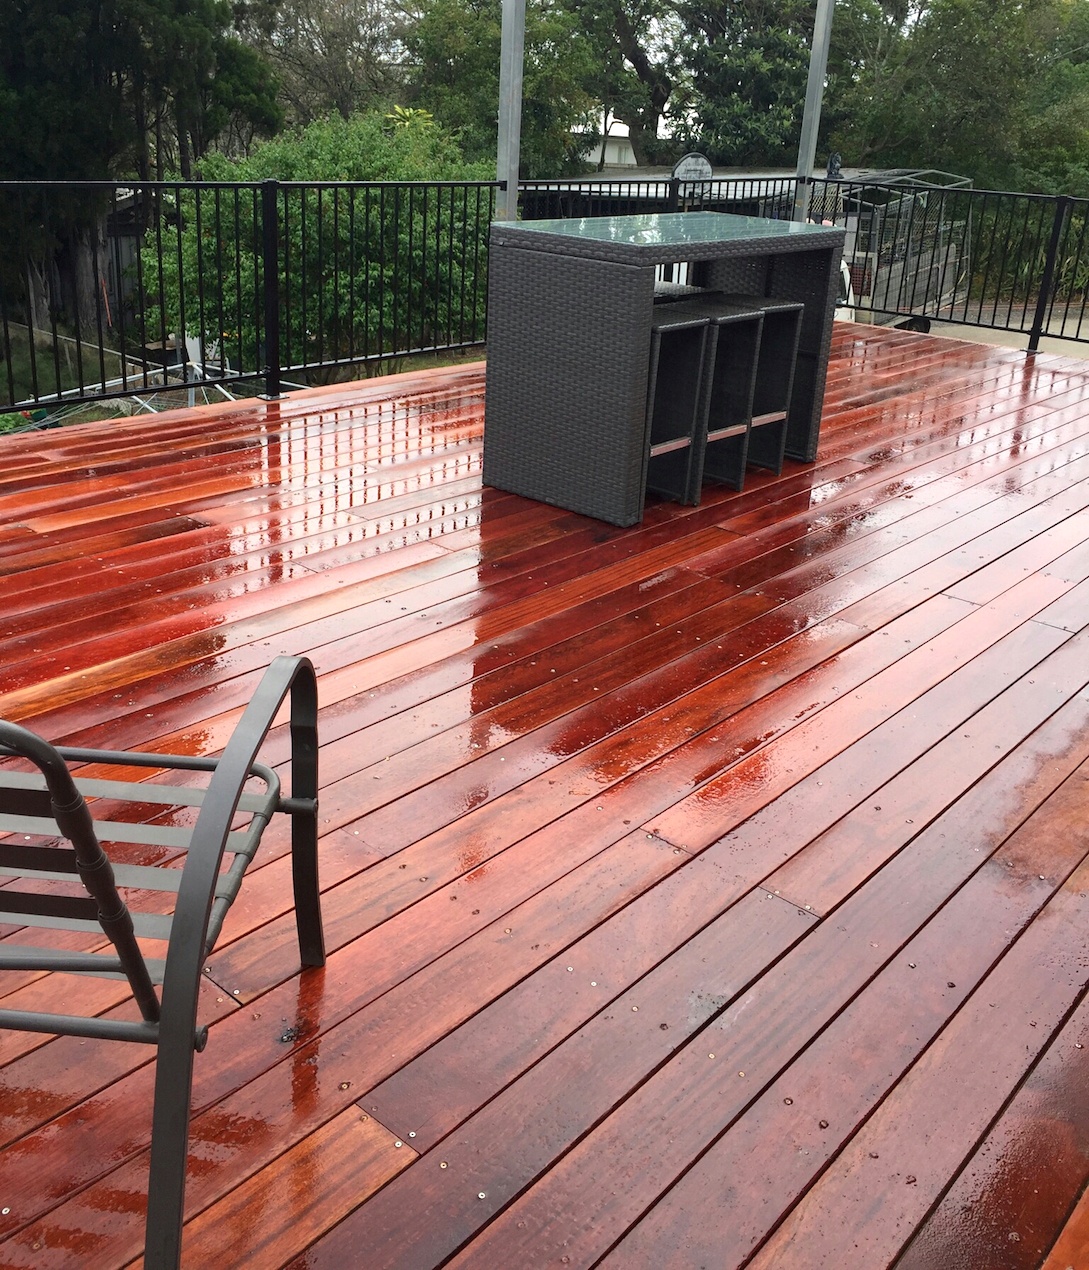 The completed deck on a Boxspan steel deck frame